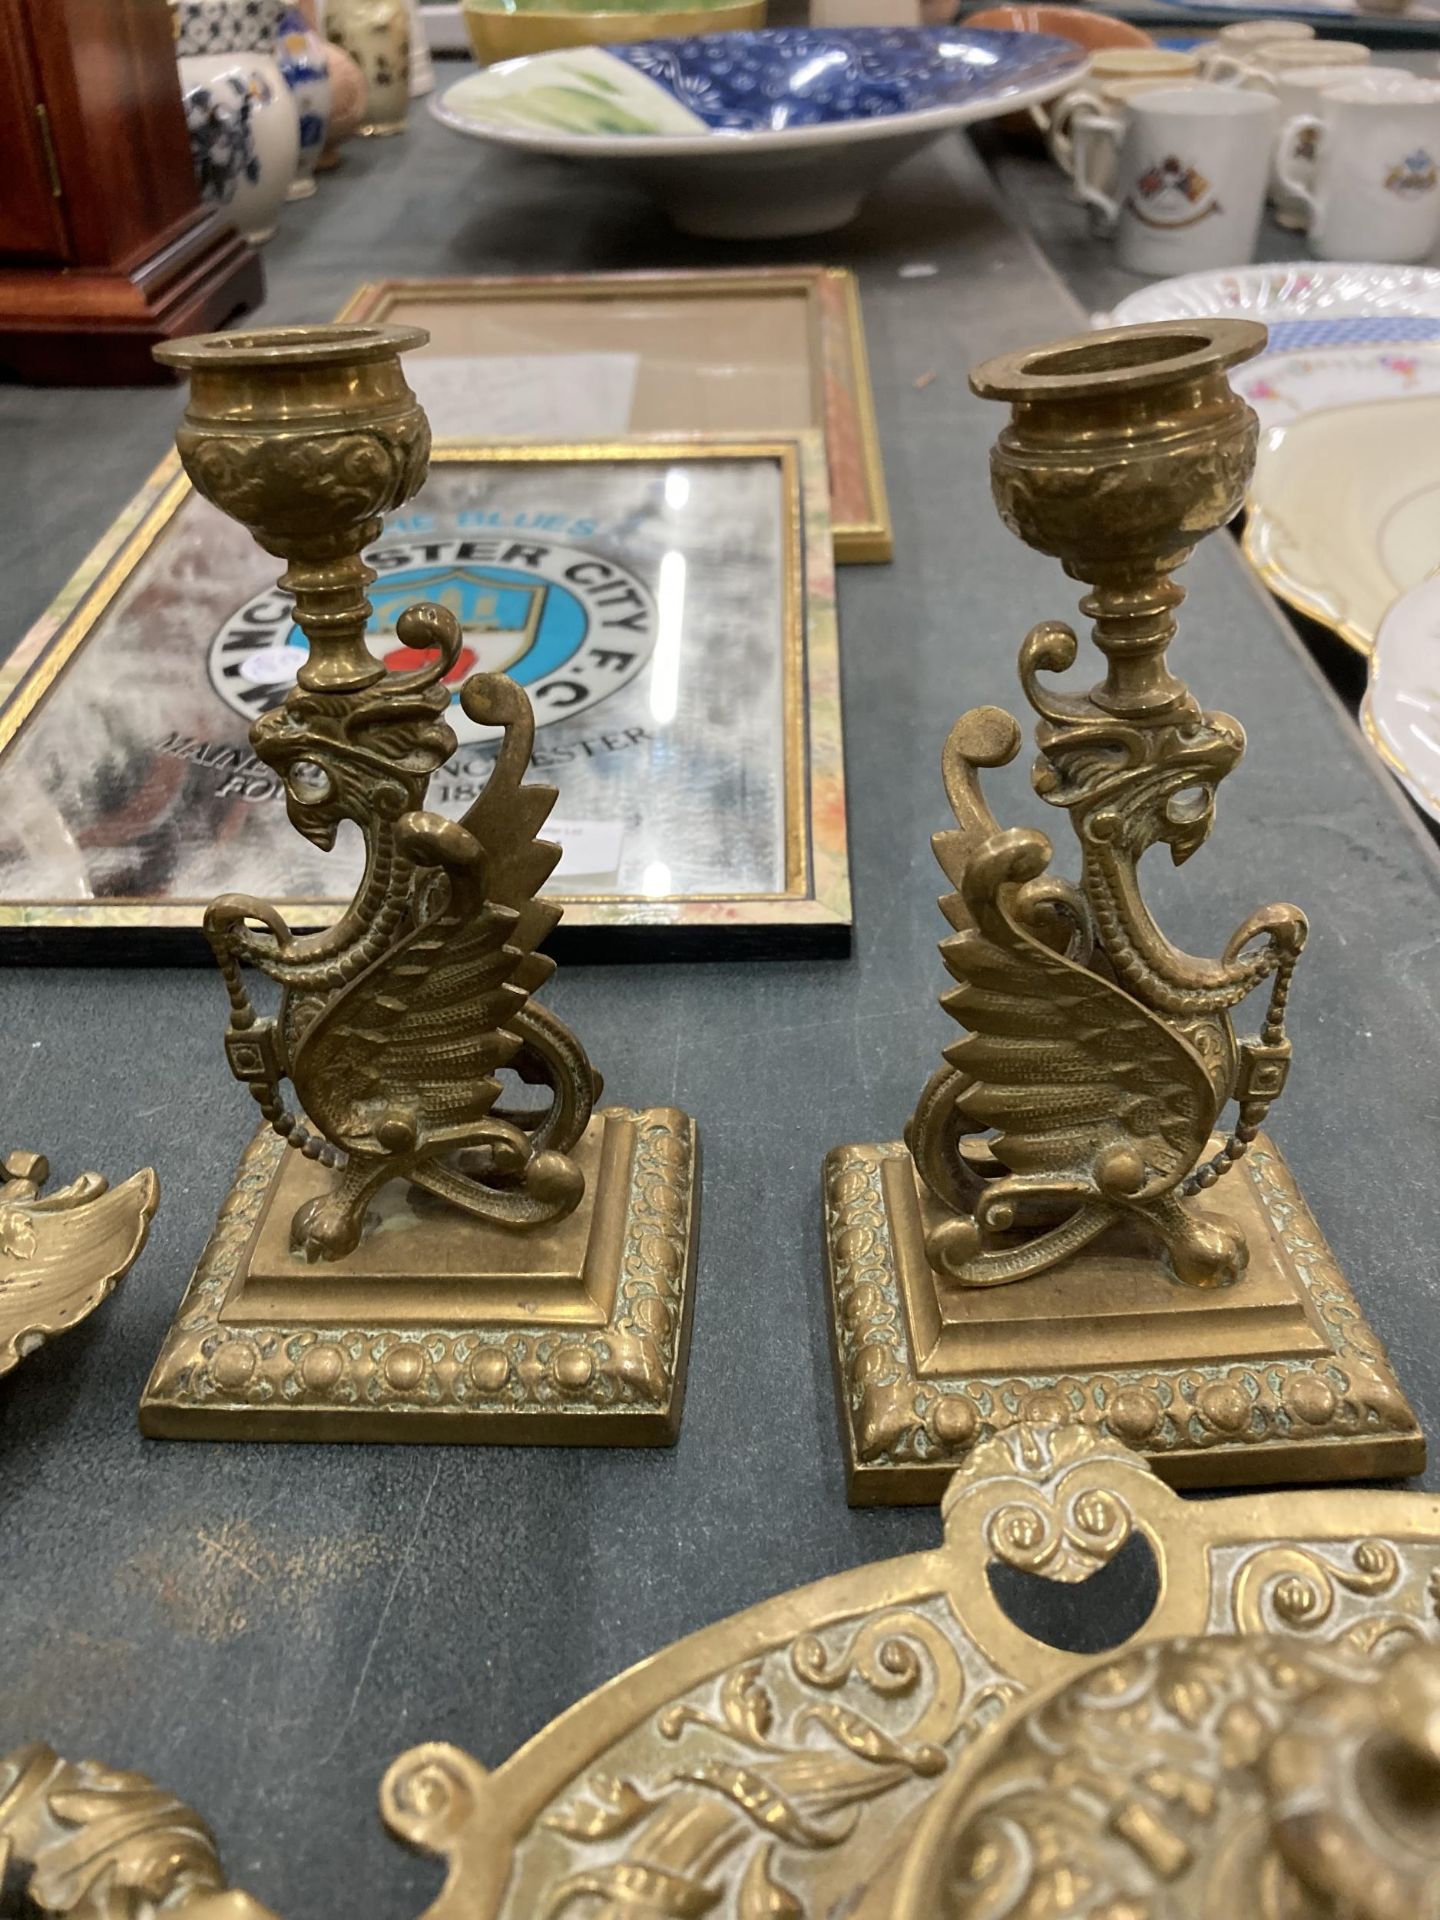 THREE ORNATE VINTAGE BRASS INKWELLS TOGETHER WITH A PAIR OF GRIFFIN DESIGN CANDLESTICKS - Image 4 of 4